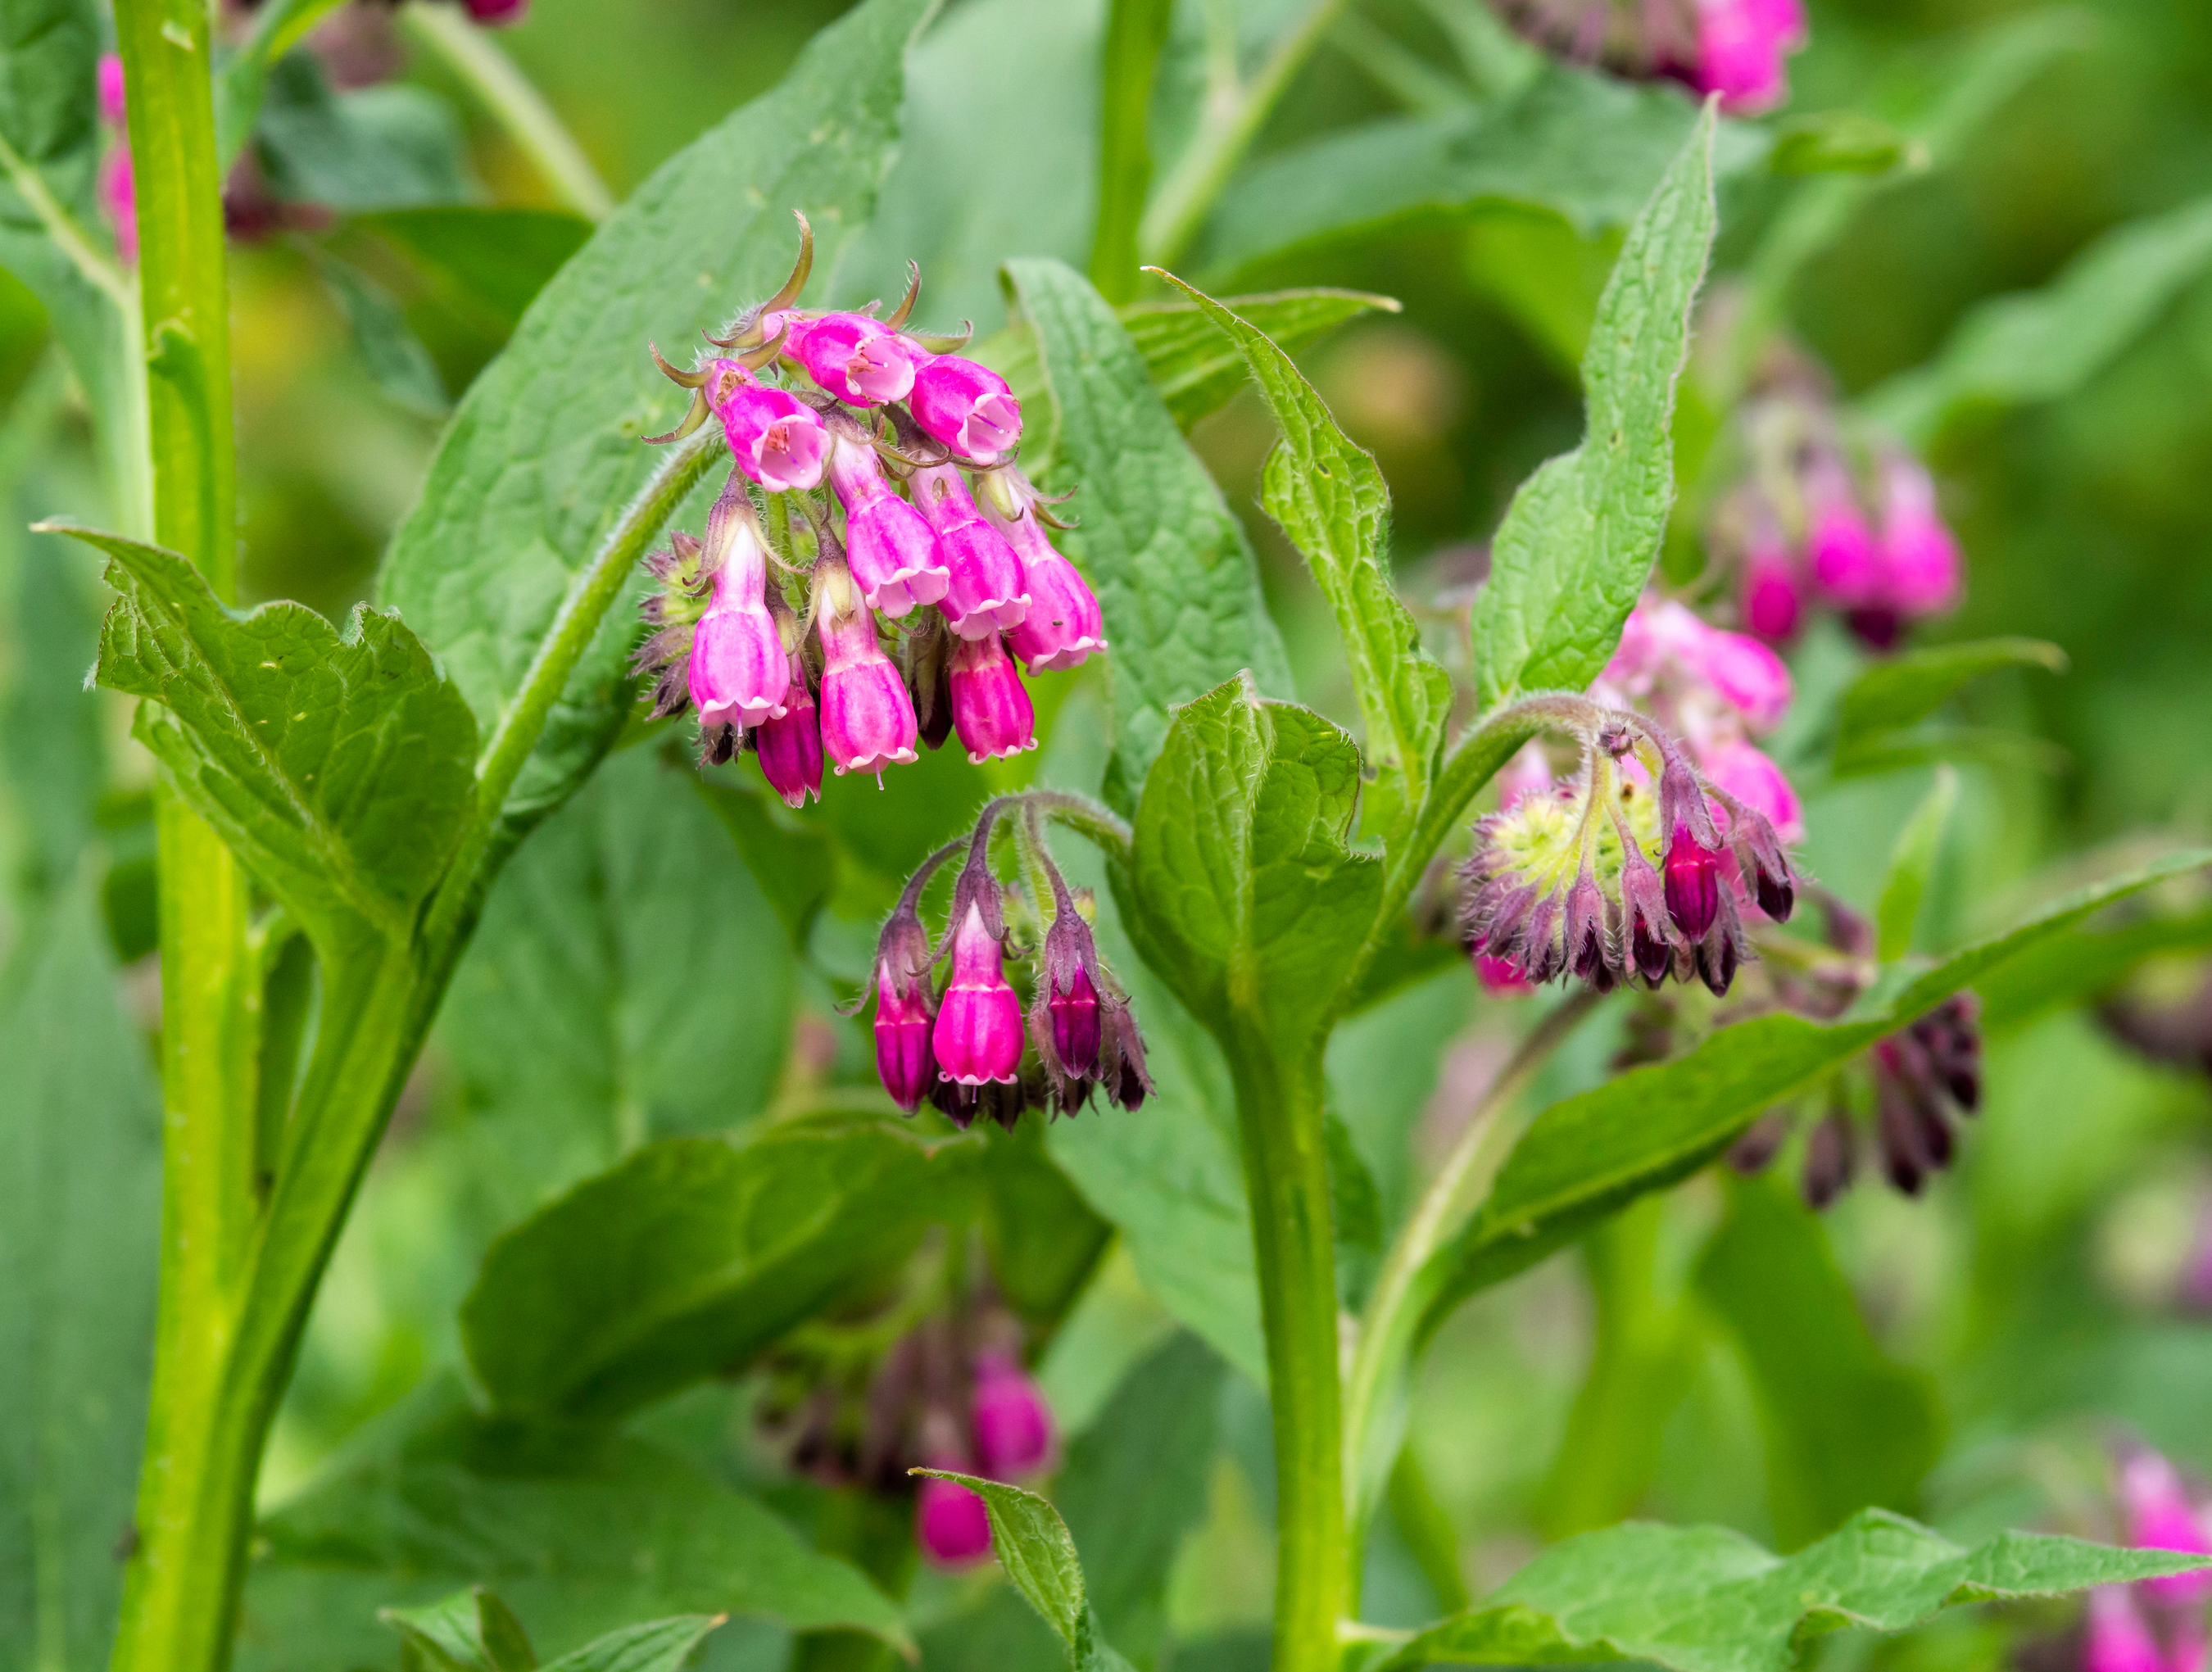 Pink flowers of comfrey,  Symphytum x uplandicum,  medicinal and decorative plant, blooming in a garden, closeup with selective focus